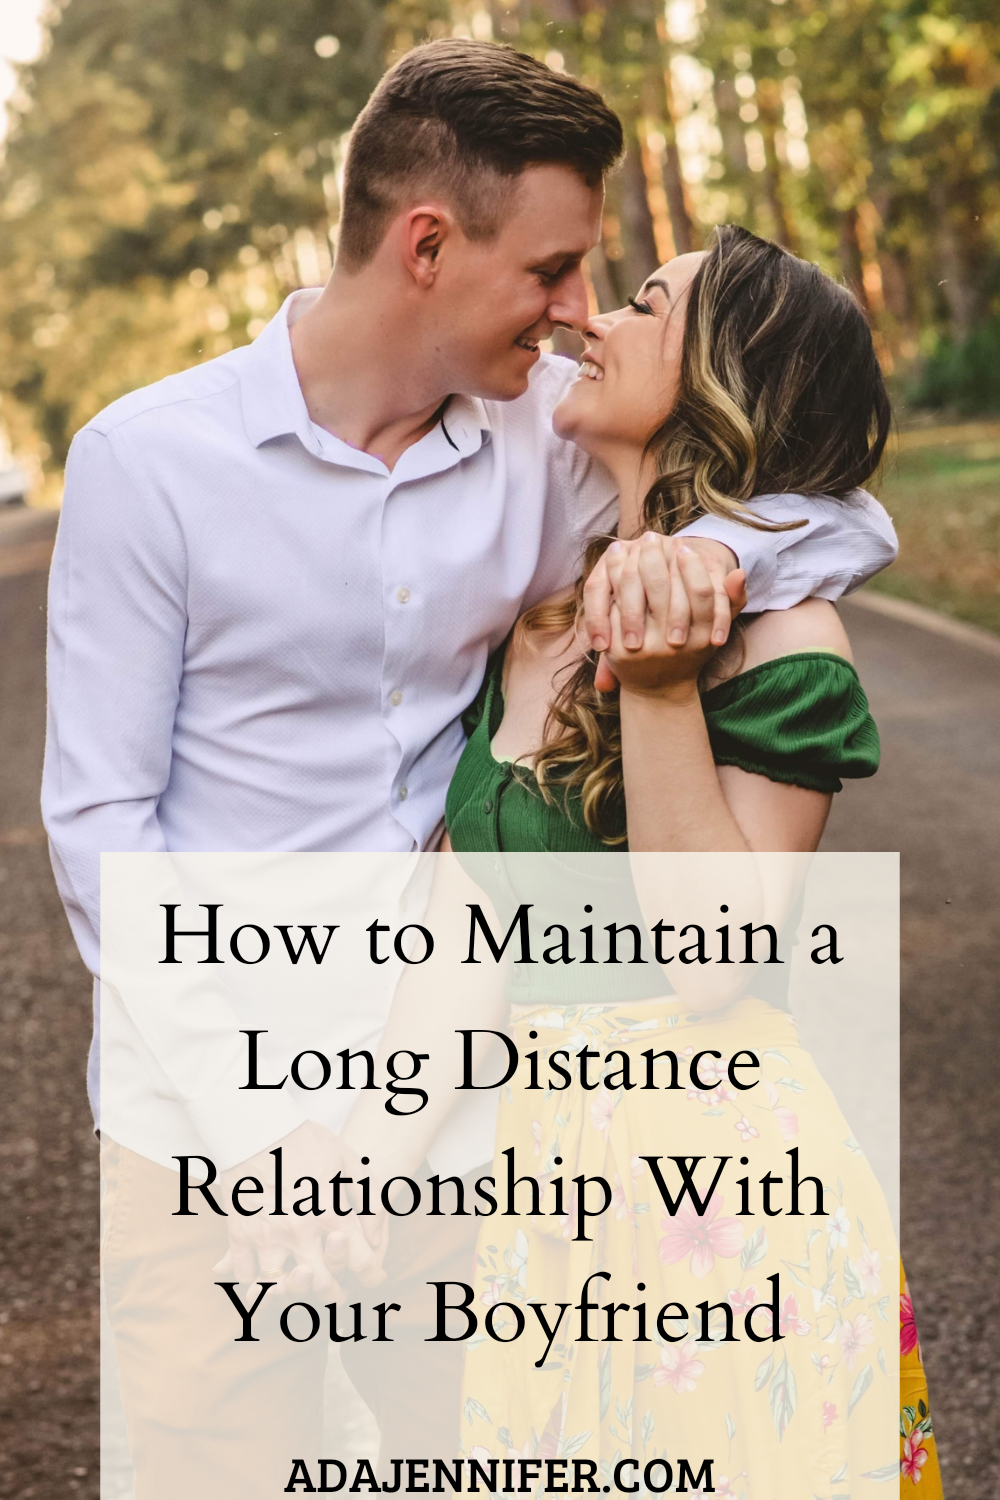 How to maintain a long distance relationship with boyfriend